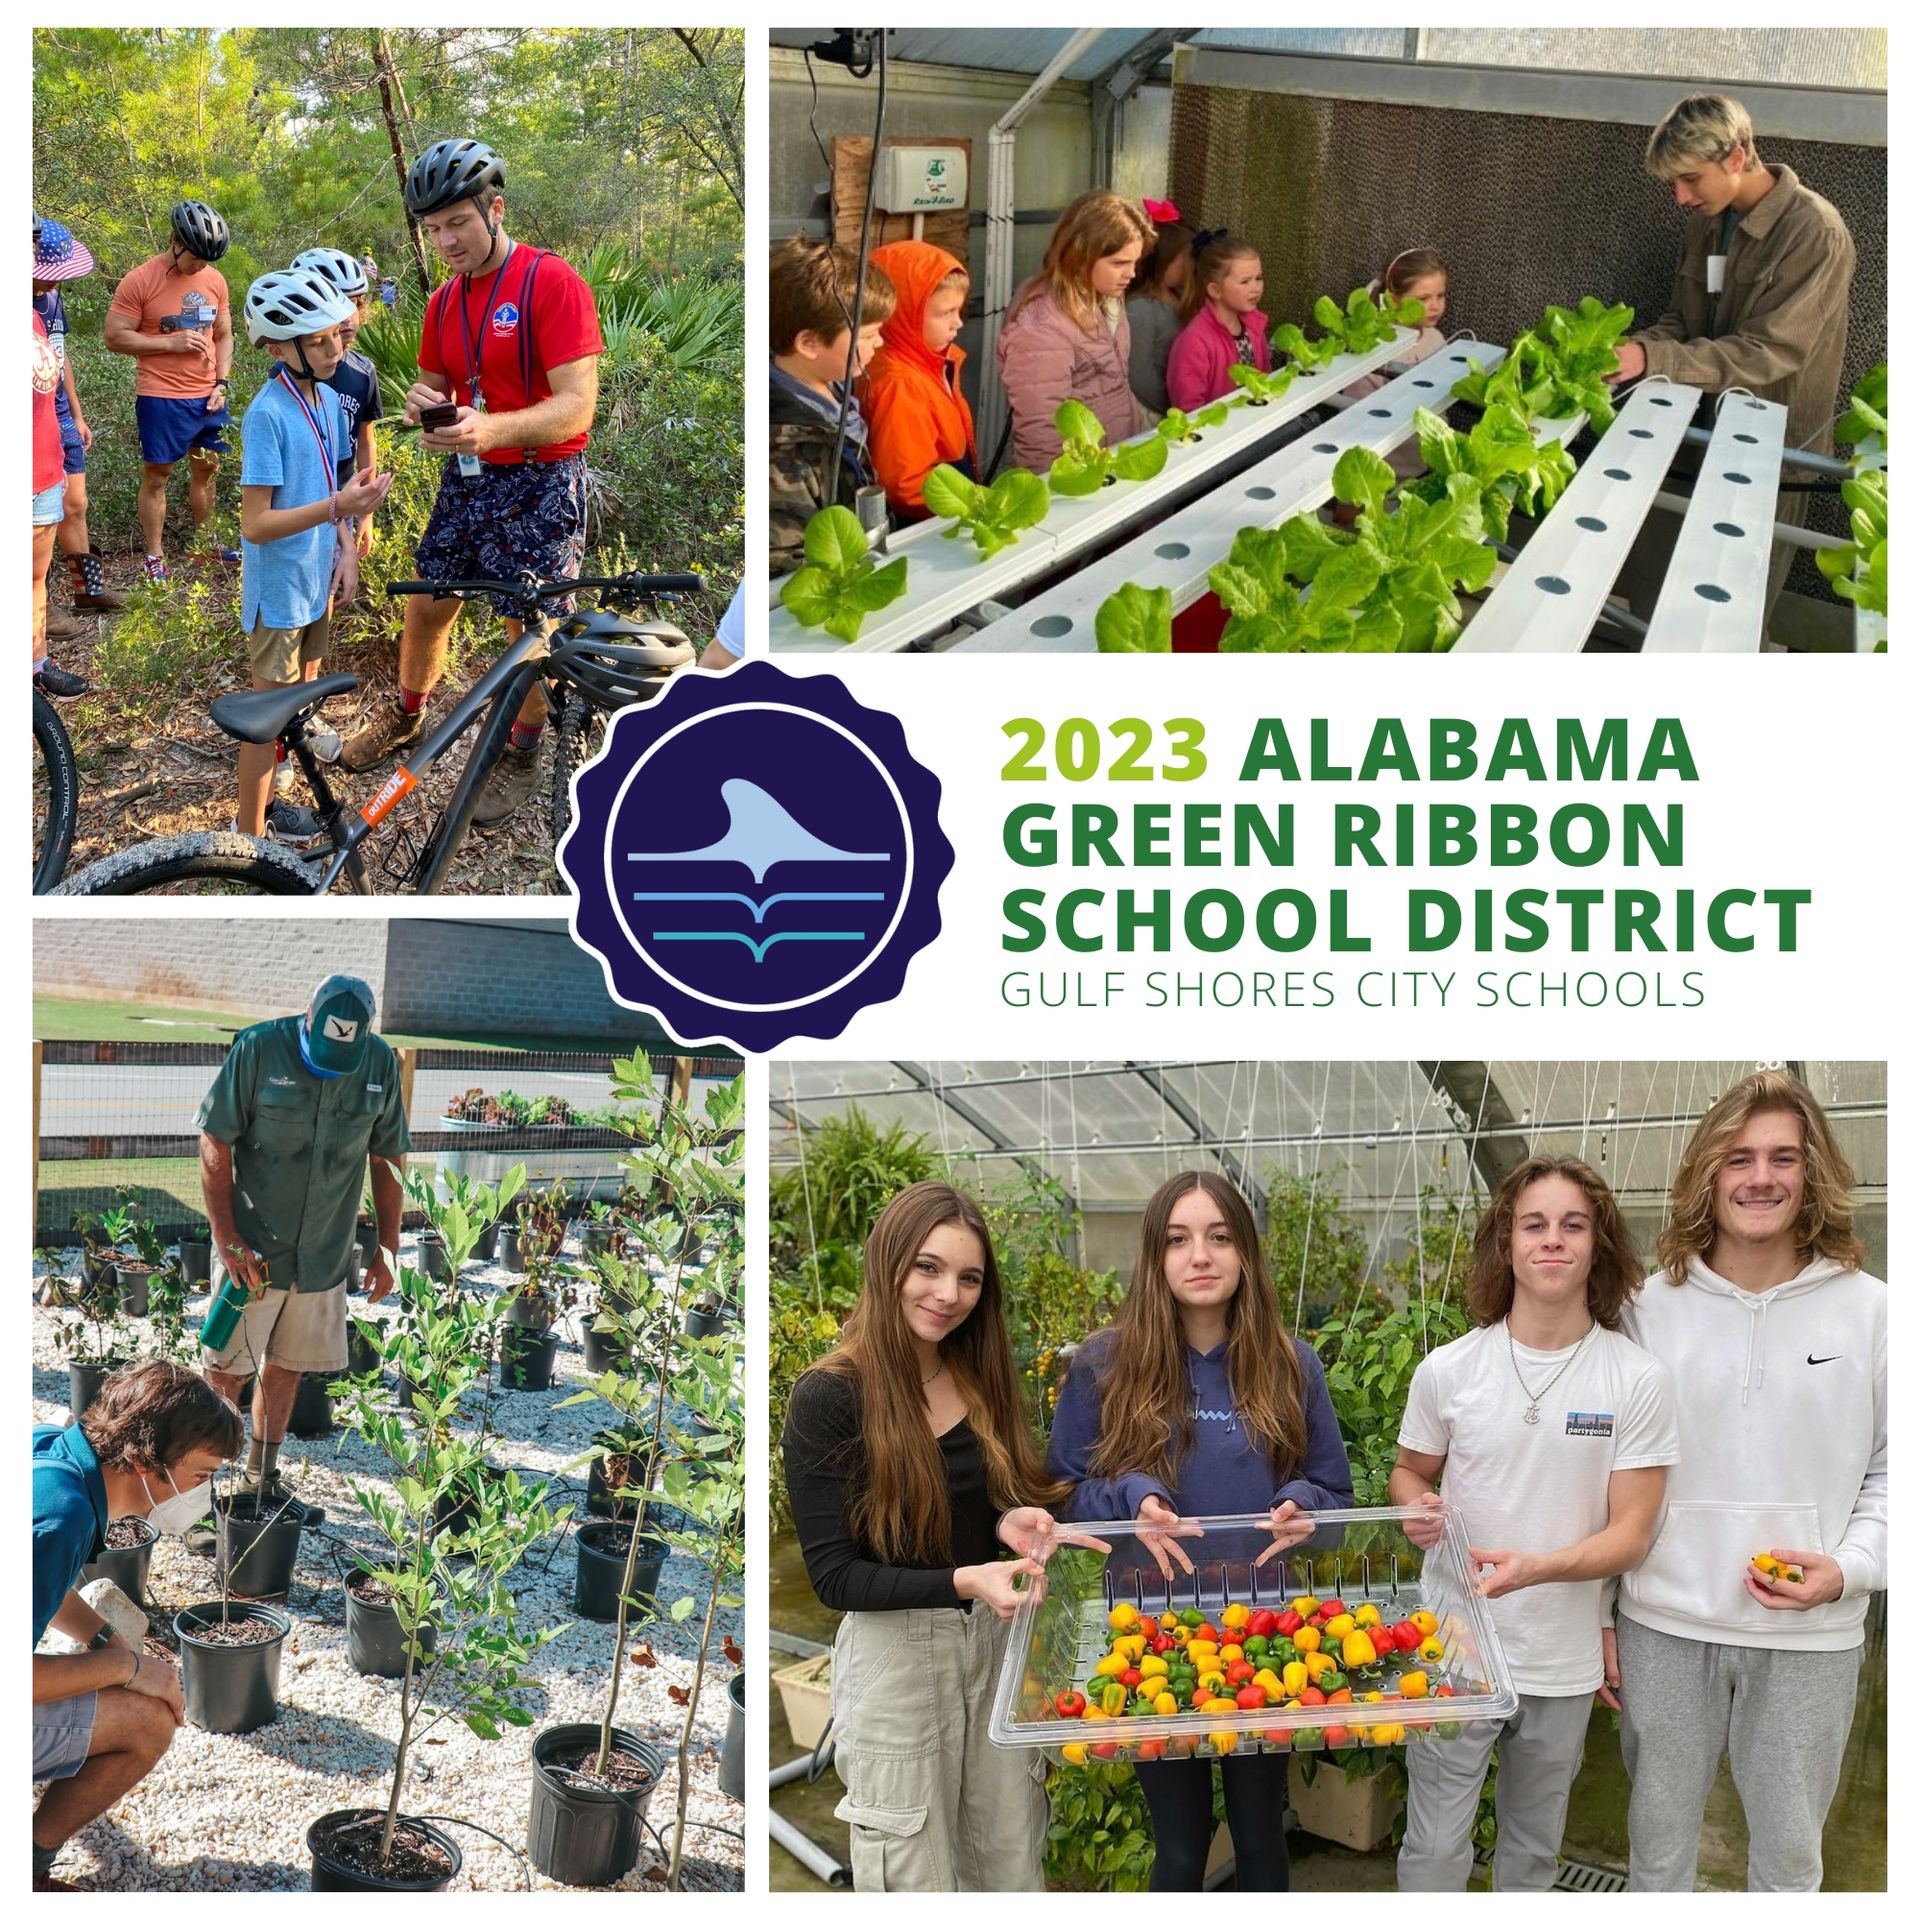 State and federal officials will present the Green Ribbon Award to Gulf Shores schools May 23.